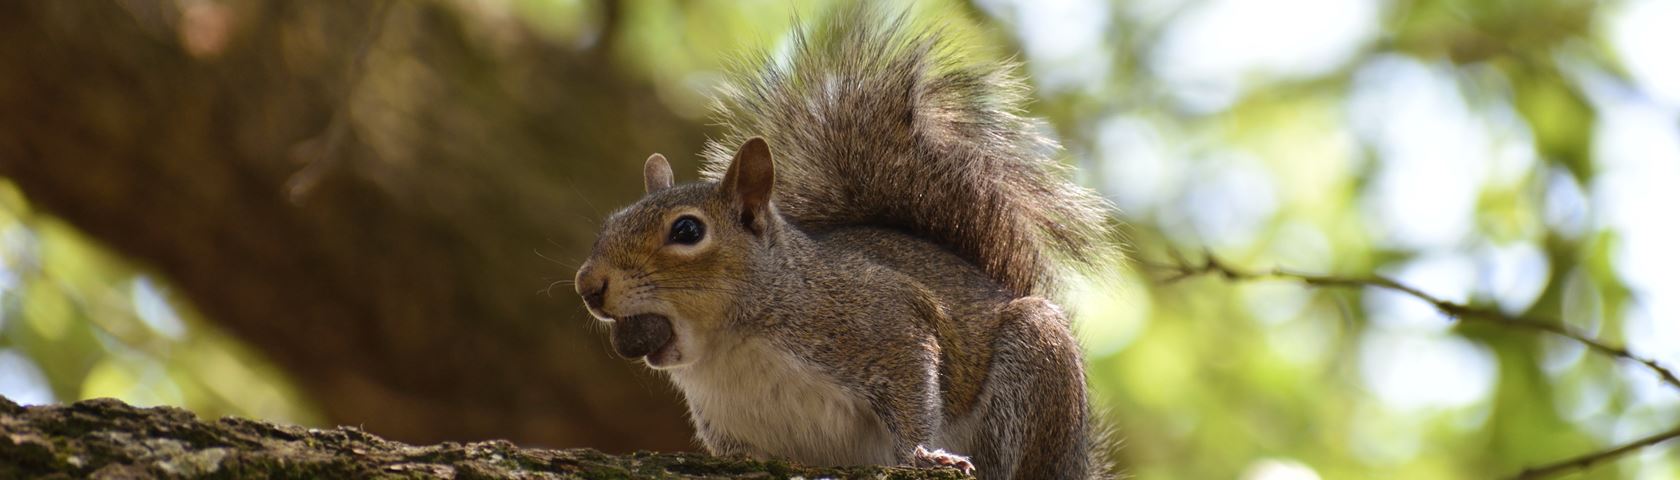 Squirrel with a Nut on a Branch